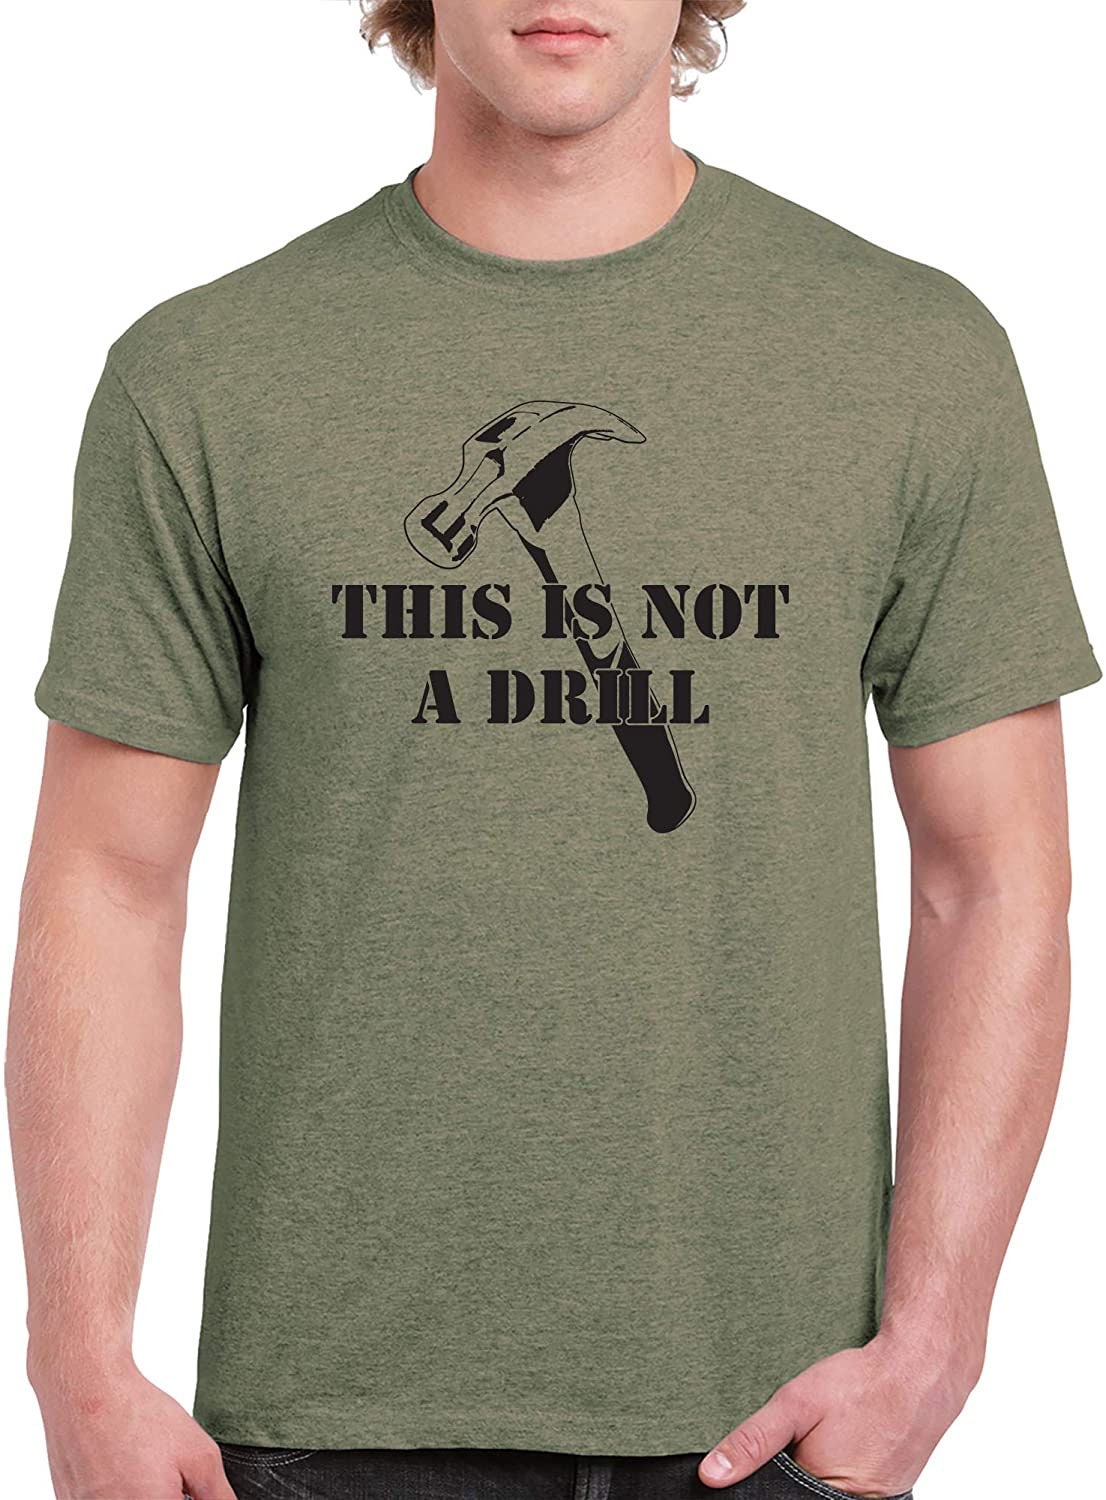 This Is Not A Drill T-Shirt Funny Dad Handyman Workshop | Etsy